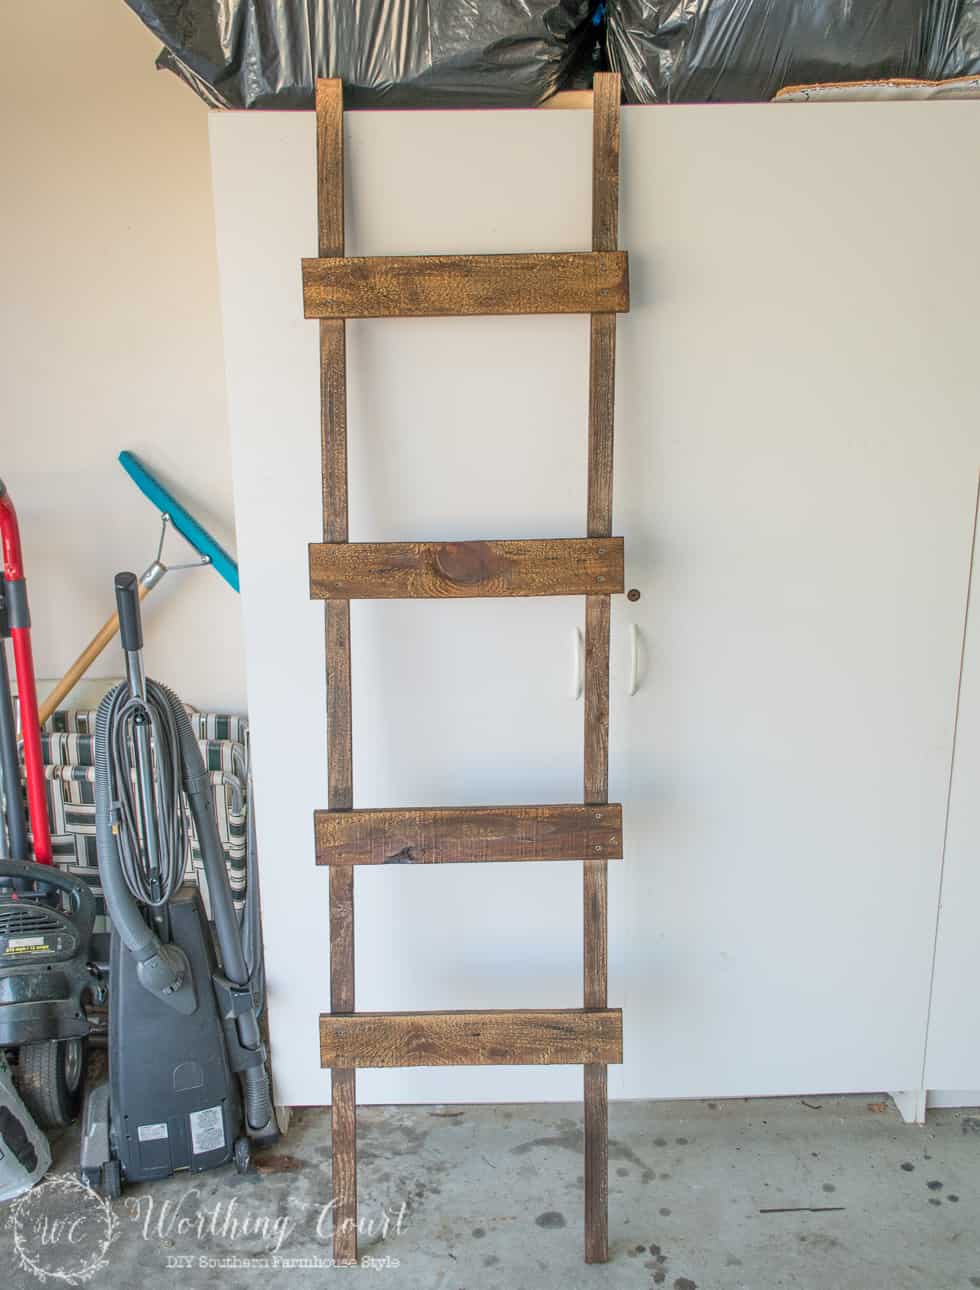 How To Make A Rustic Blanket Ladder For Under $20 - Worthing Court | DIY Home Decor Made Easy